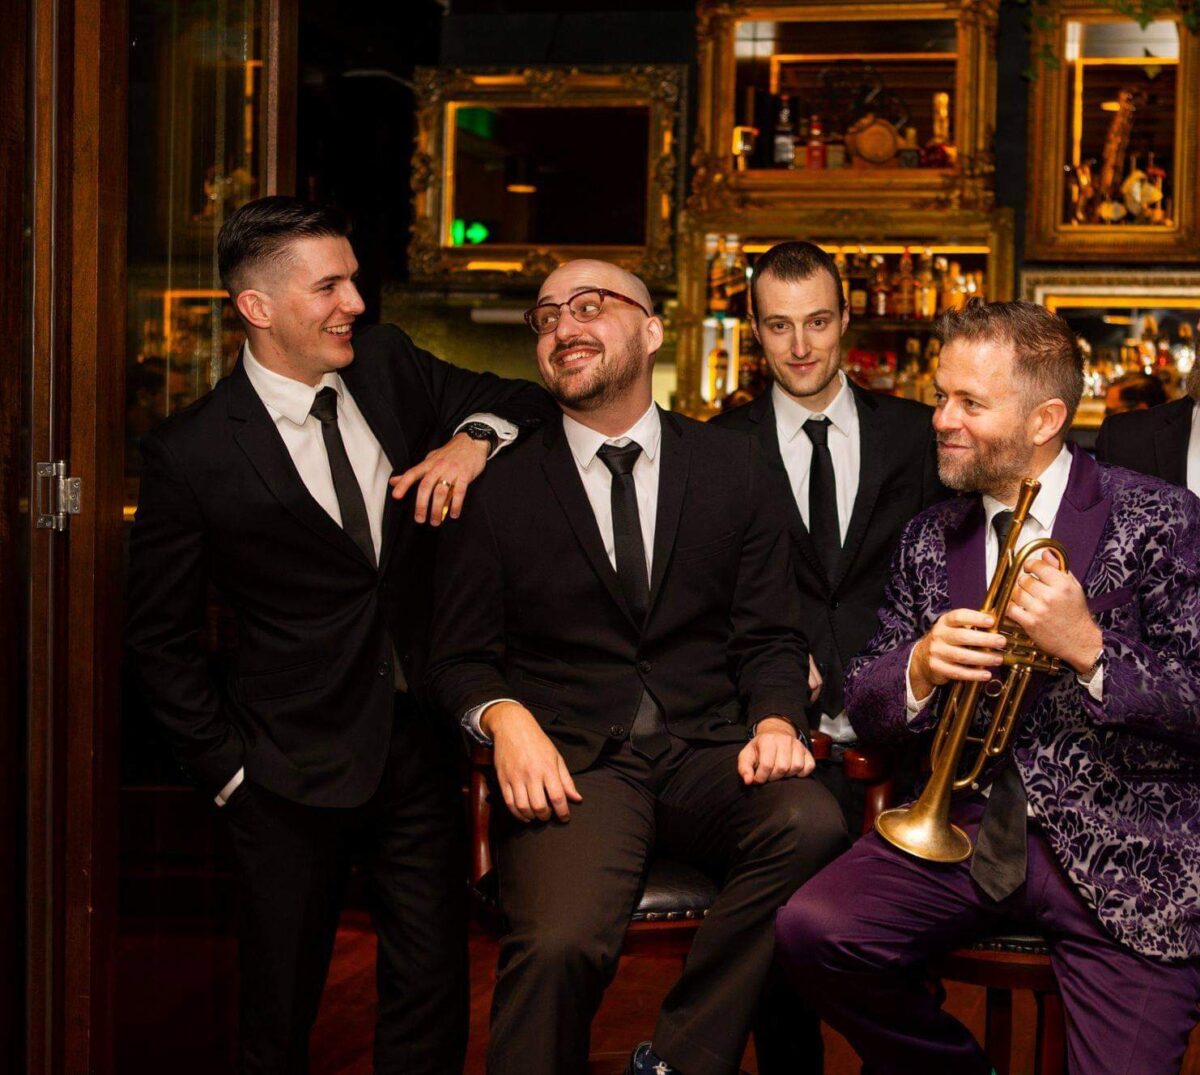 A group of white men in suits sit in a bar. One of them holds a trumpet.